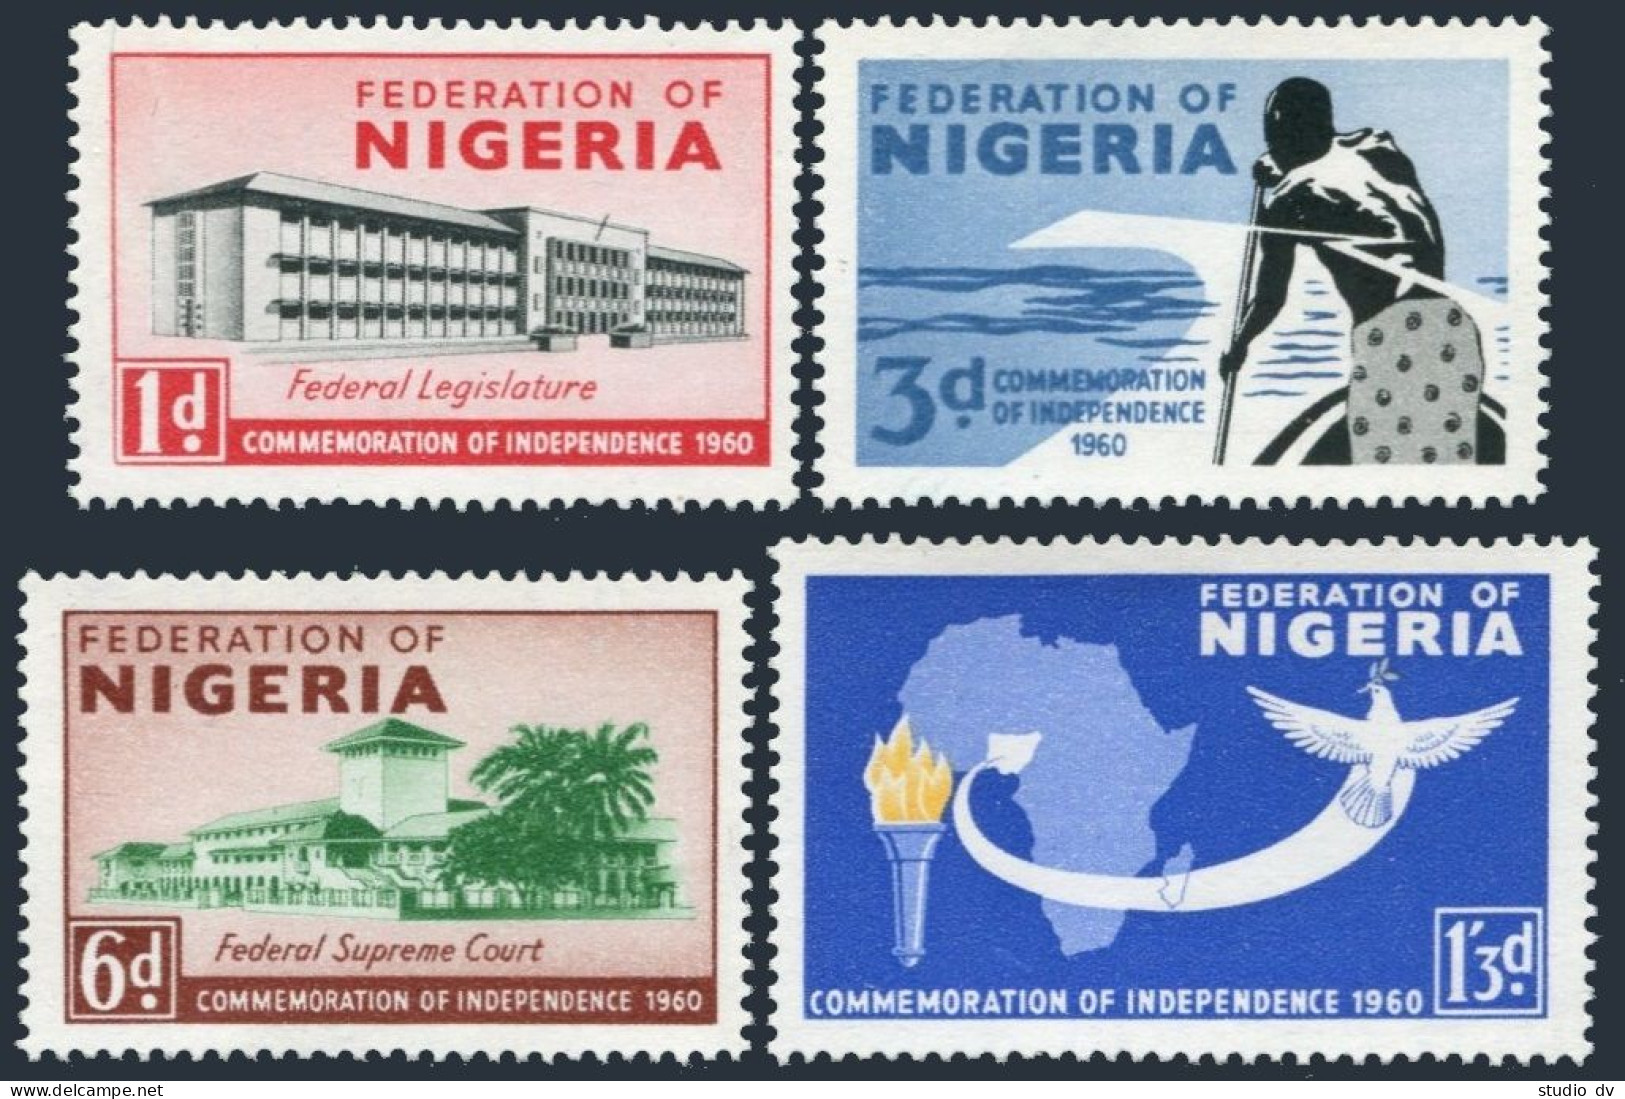 Nigeria 97-100, MNH. Michel 88-91. Commemoration Of Independence,1960. Bird,map. - Niger (1960-...)